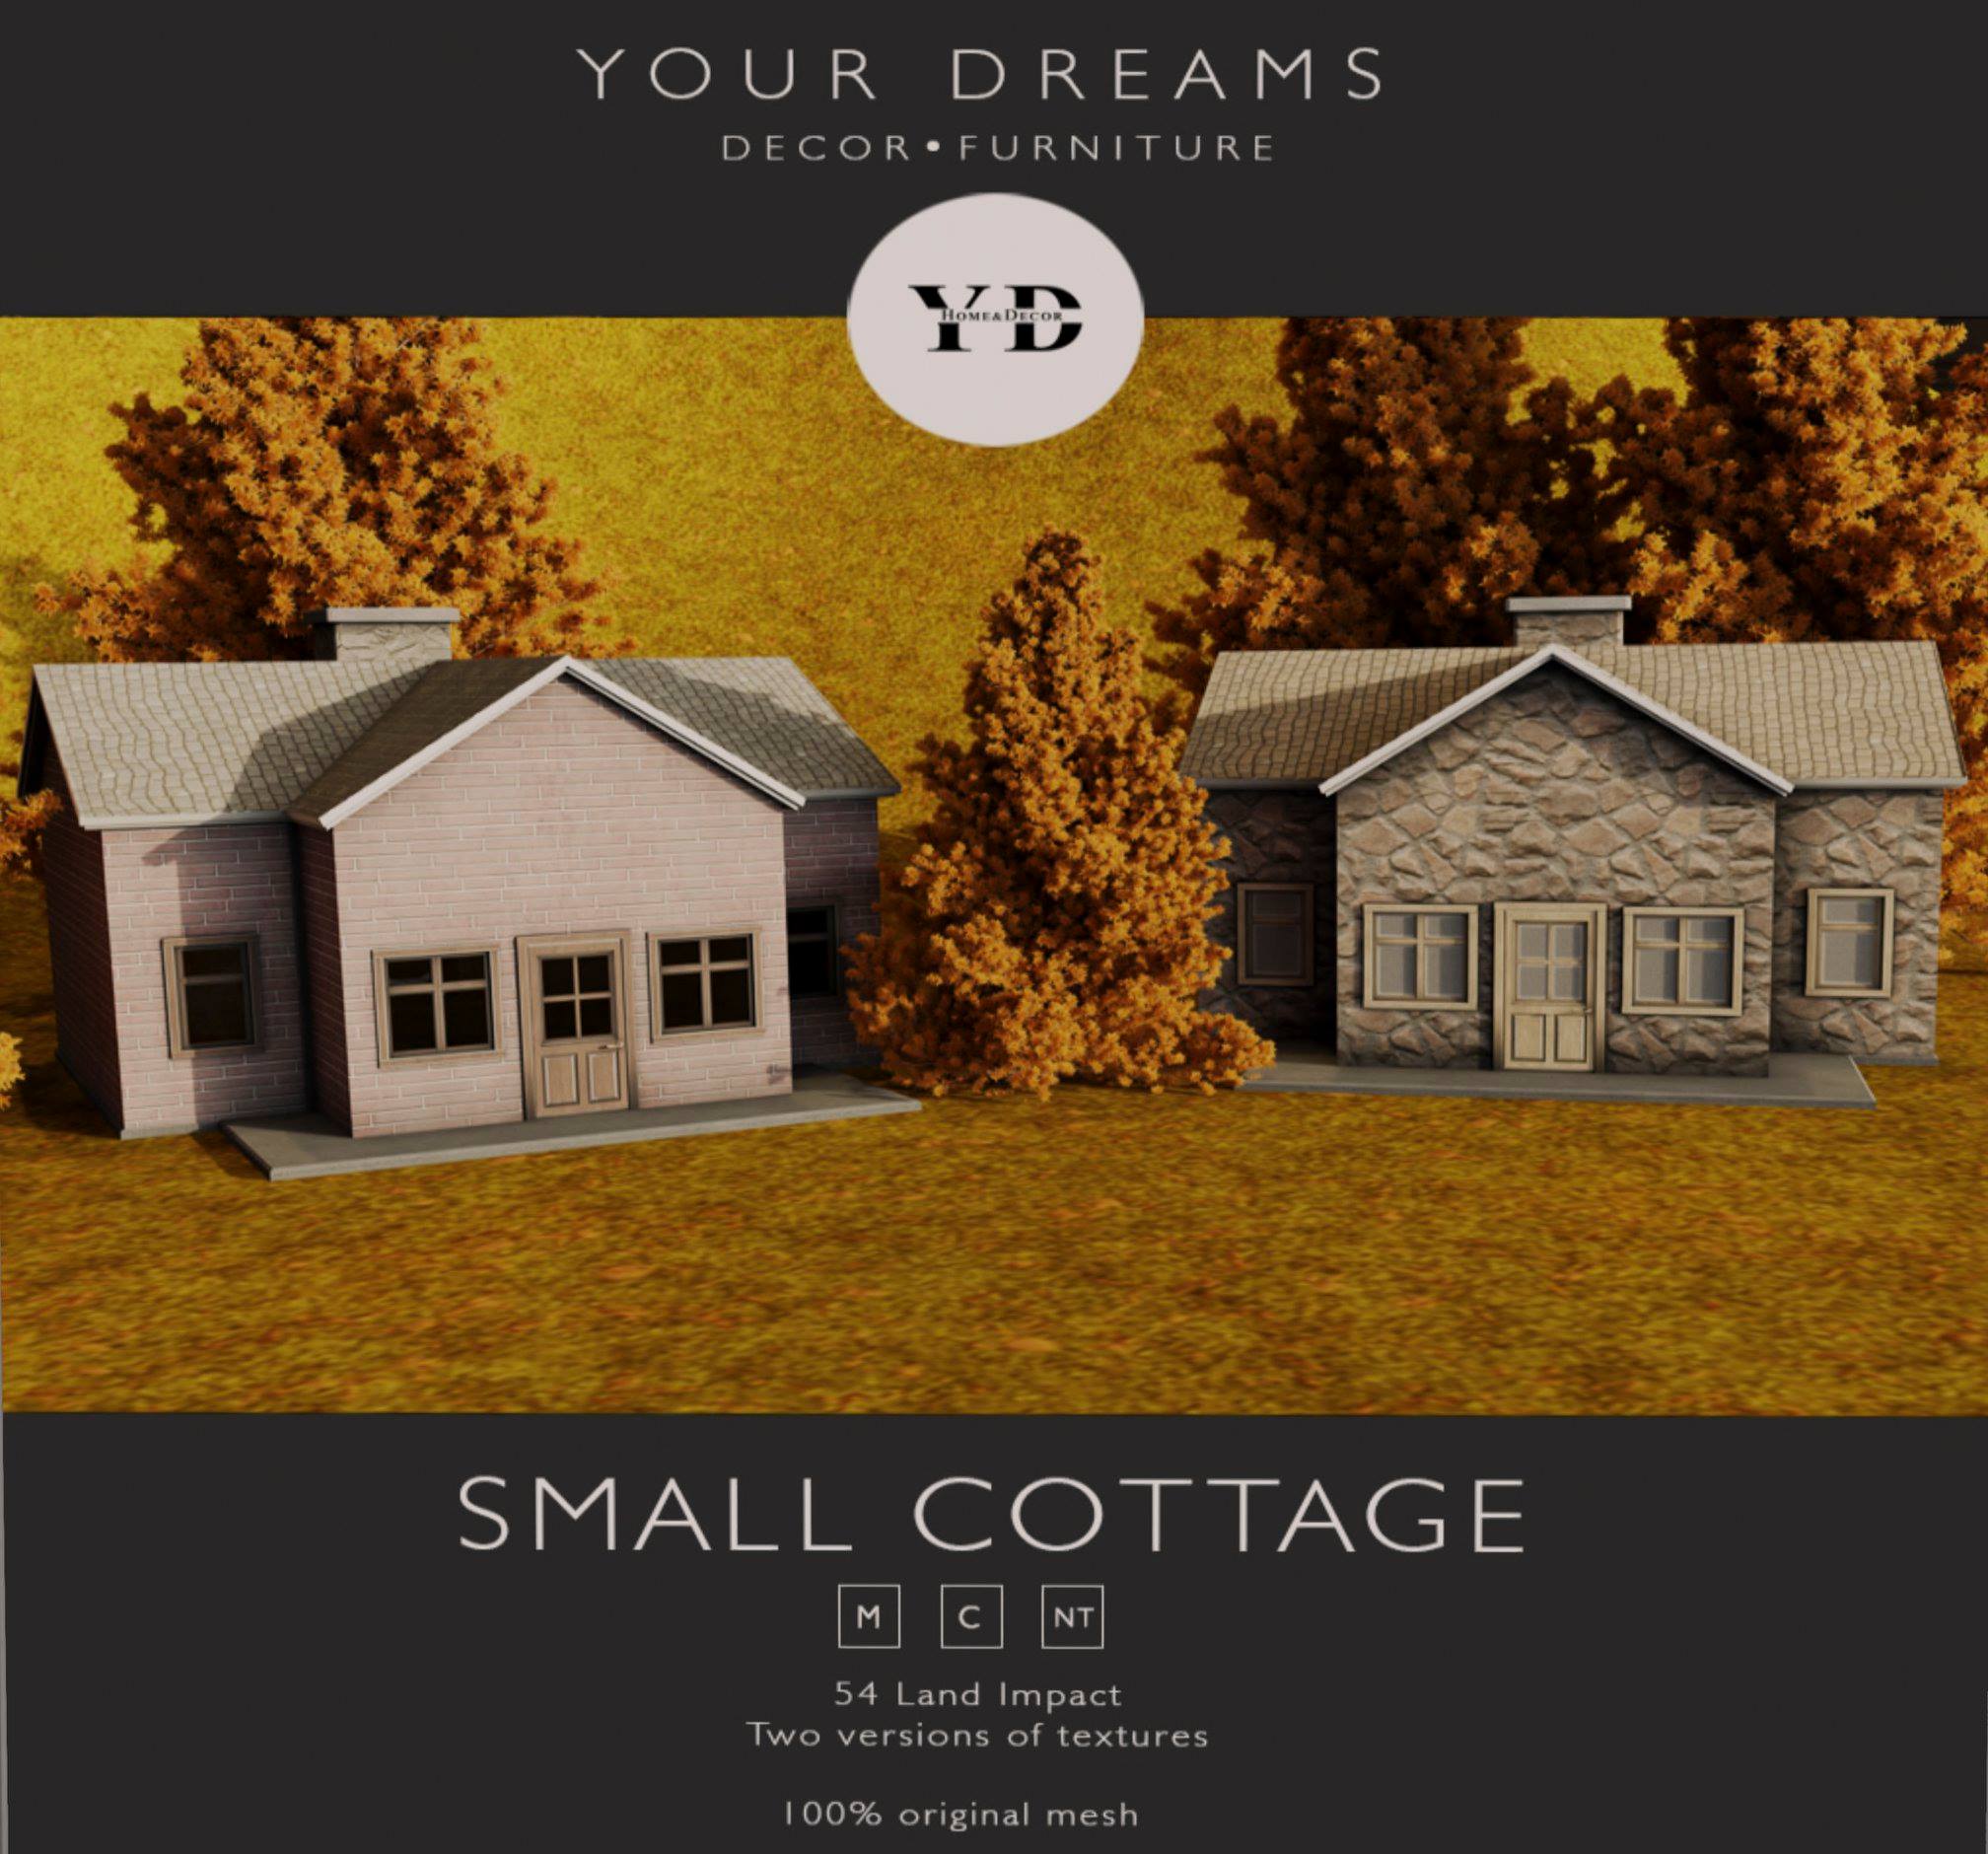 Your Dreams – Small Cottage